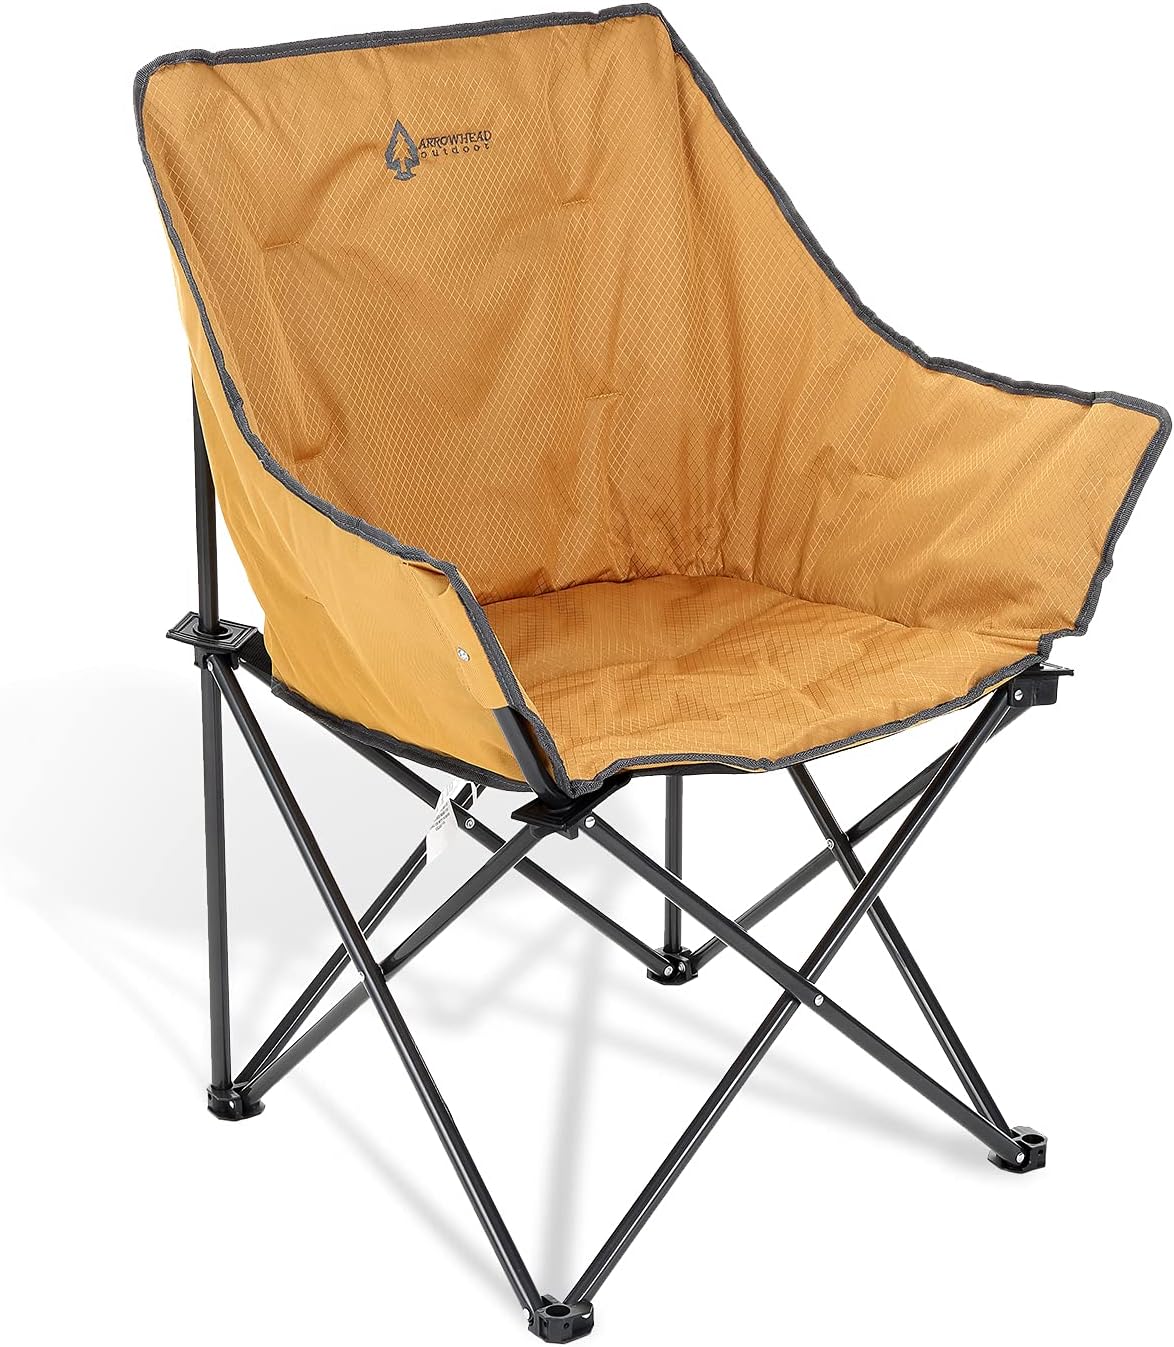 Portable Compact Folding Camping Quad Bucket Chair